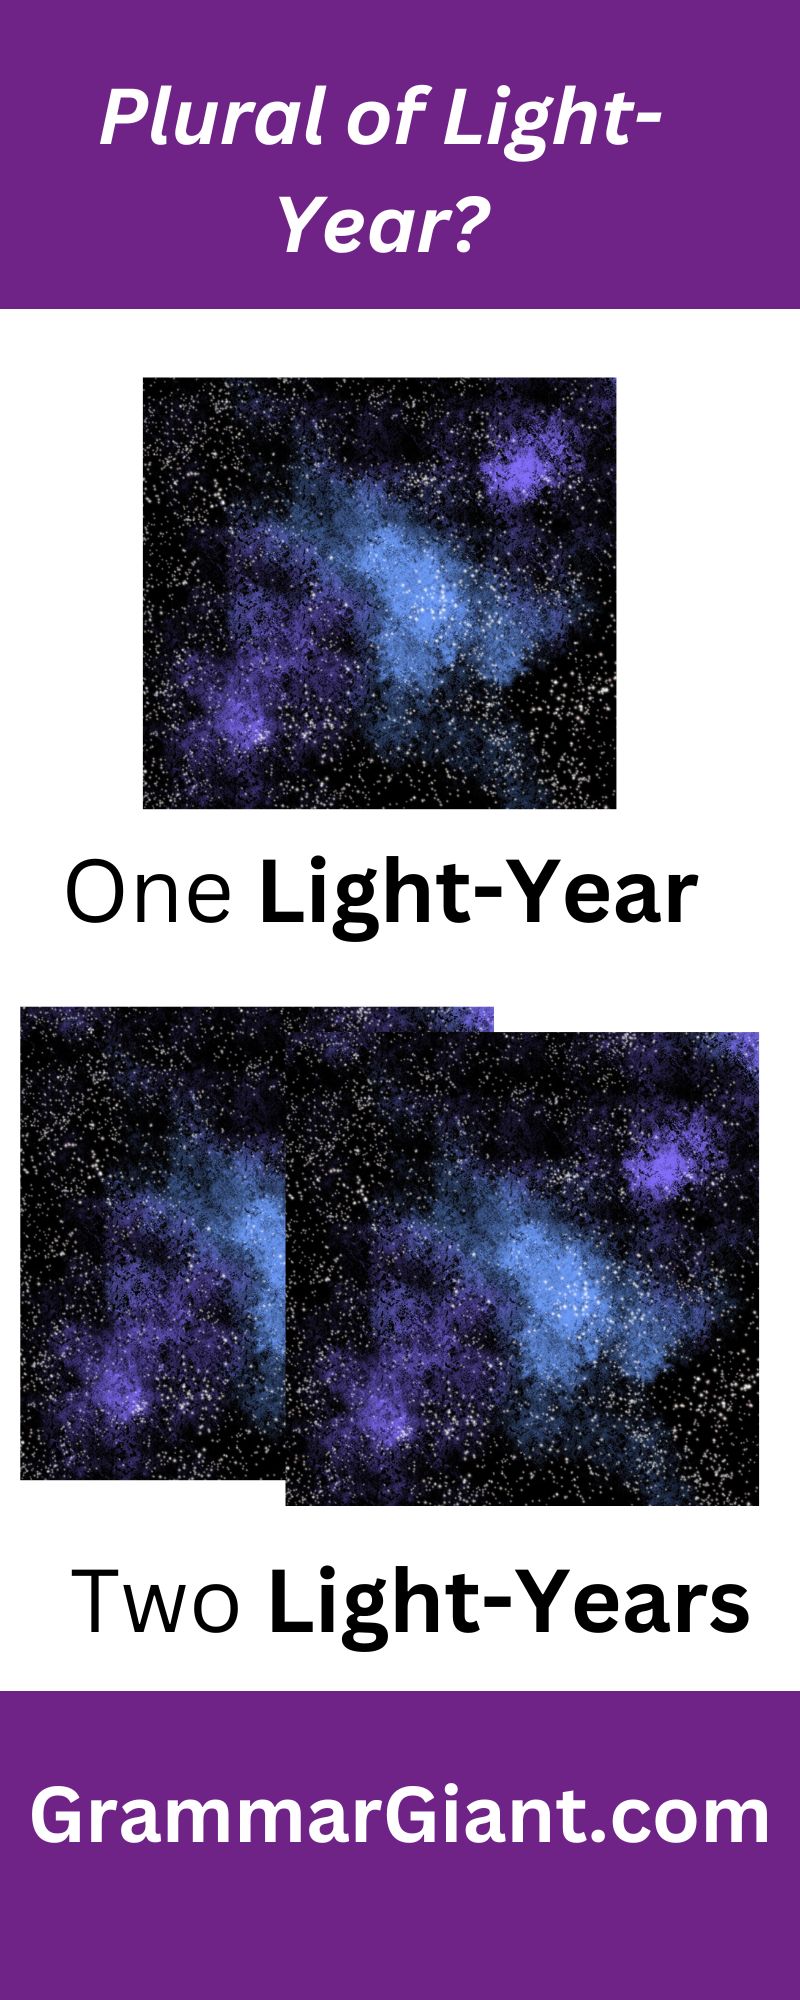 Plural of light-year